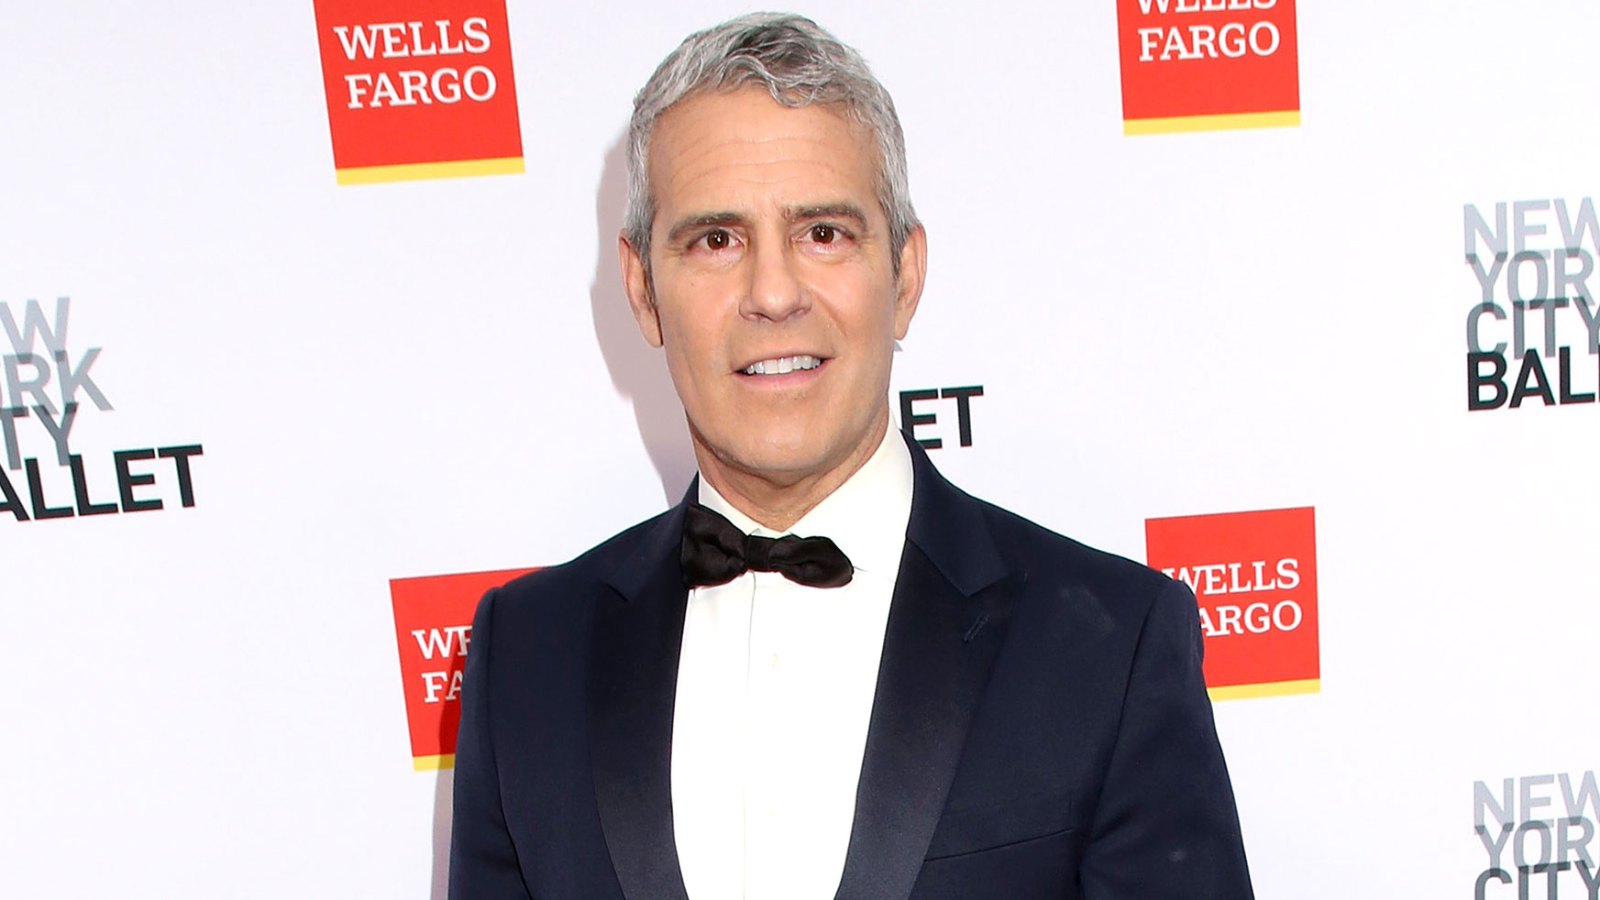 Andy Cohen Reacts to News CNN Wants to Sober Up New Year's Eve Broadcast